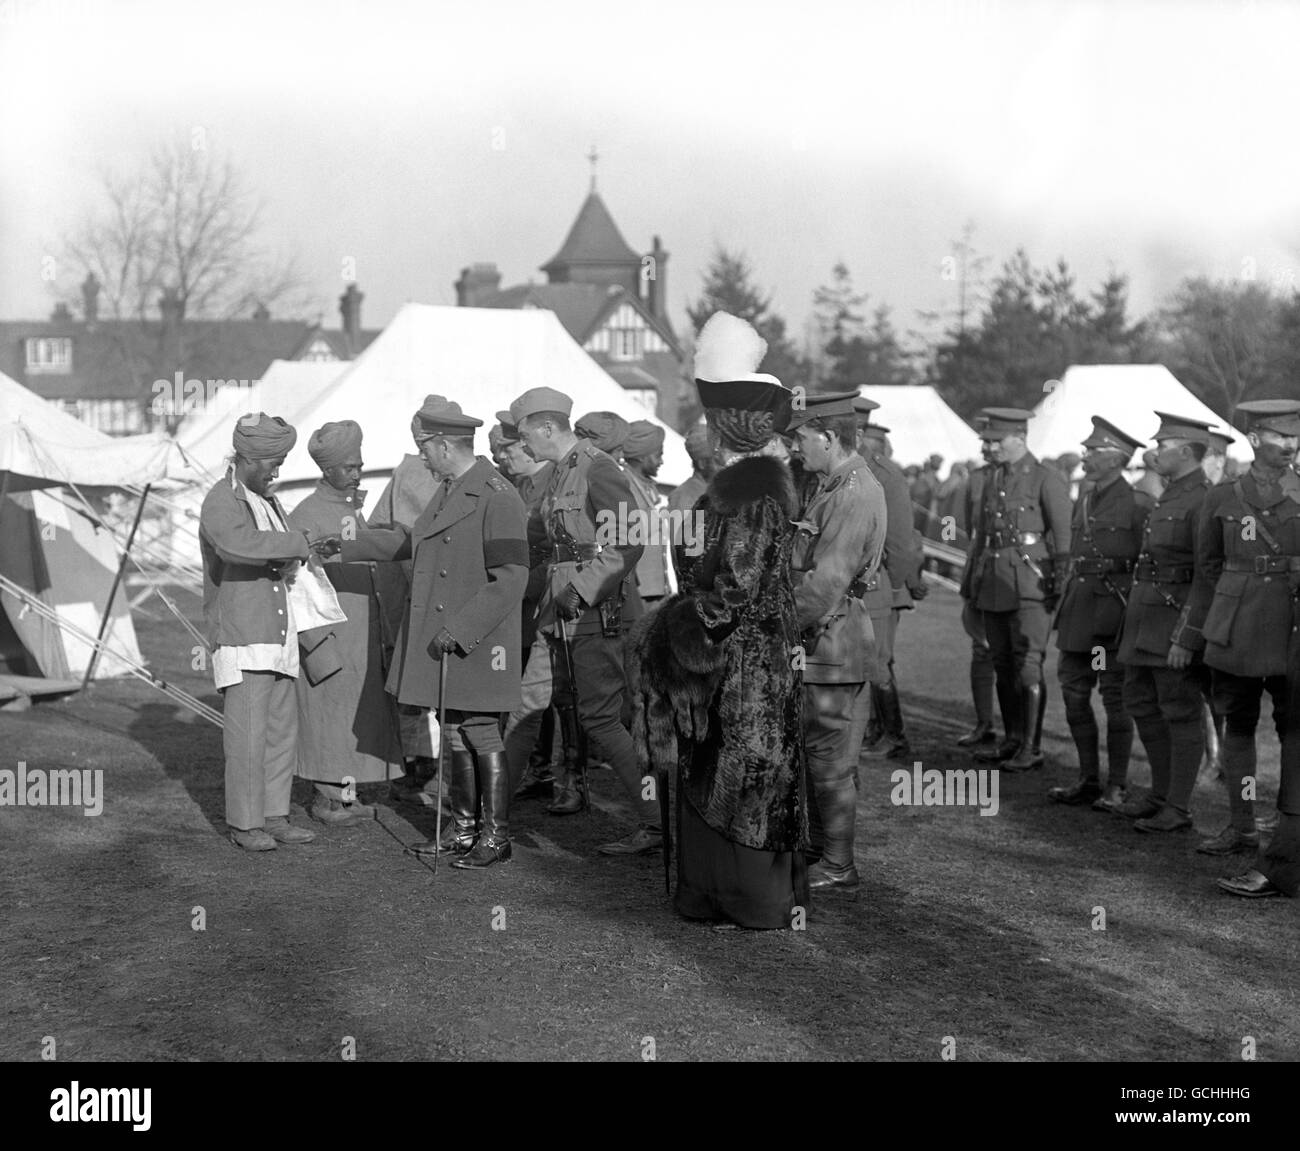 KING GEORGE V INSPECTING WOUNDED INDIAN ARMY SOLDIERS IN THE GROUNDS OF A CONVALESCENT HOSPITAL. 1915. Stock Photo